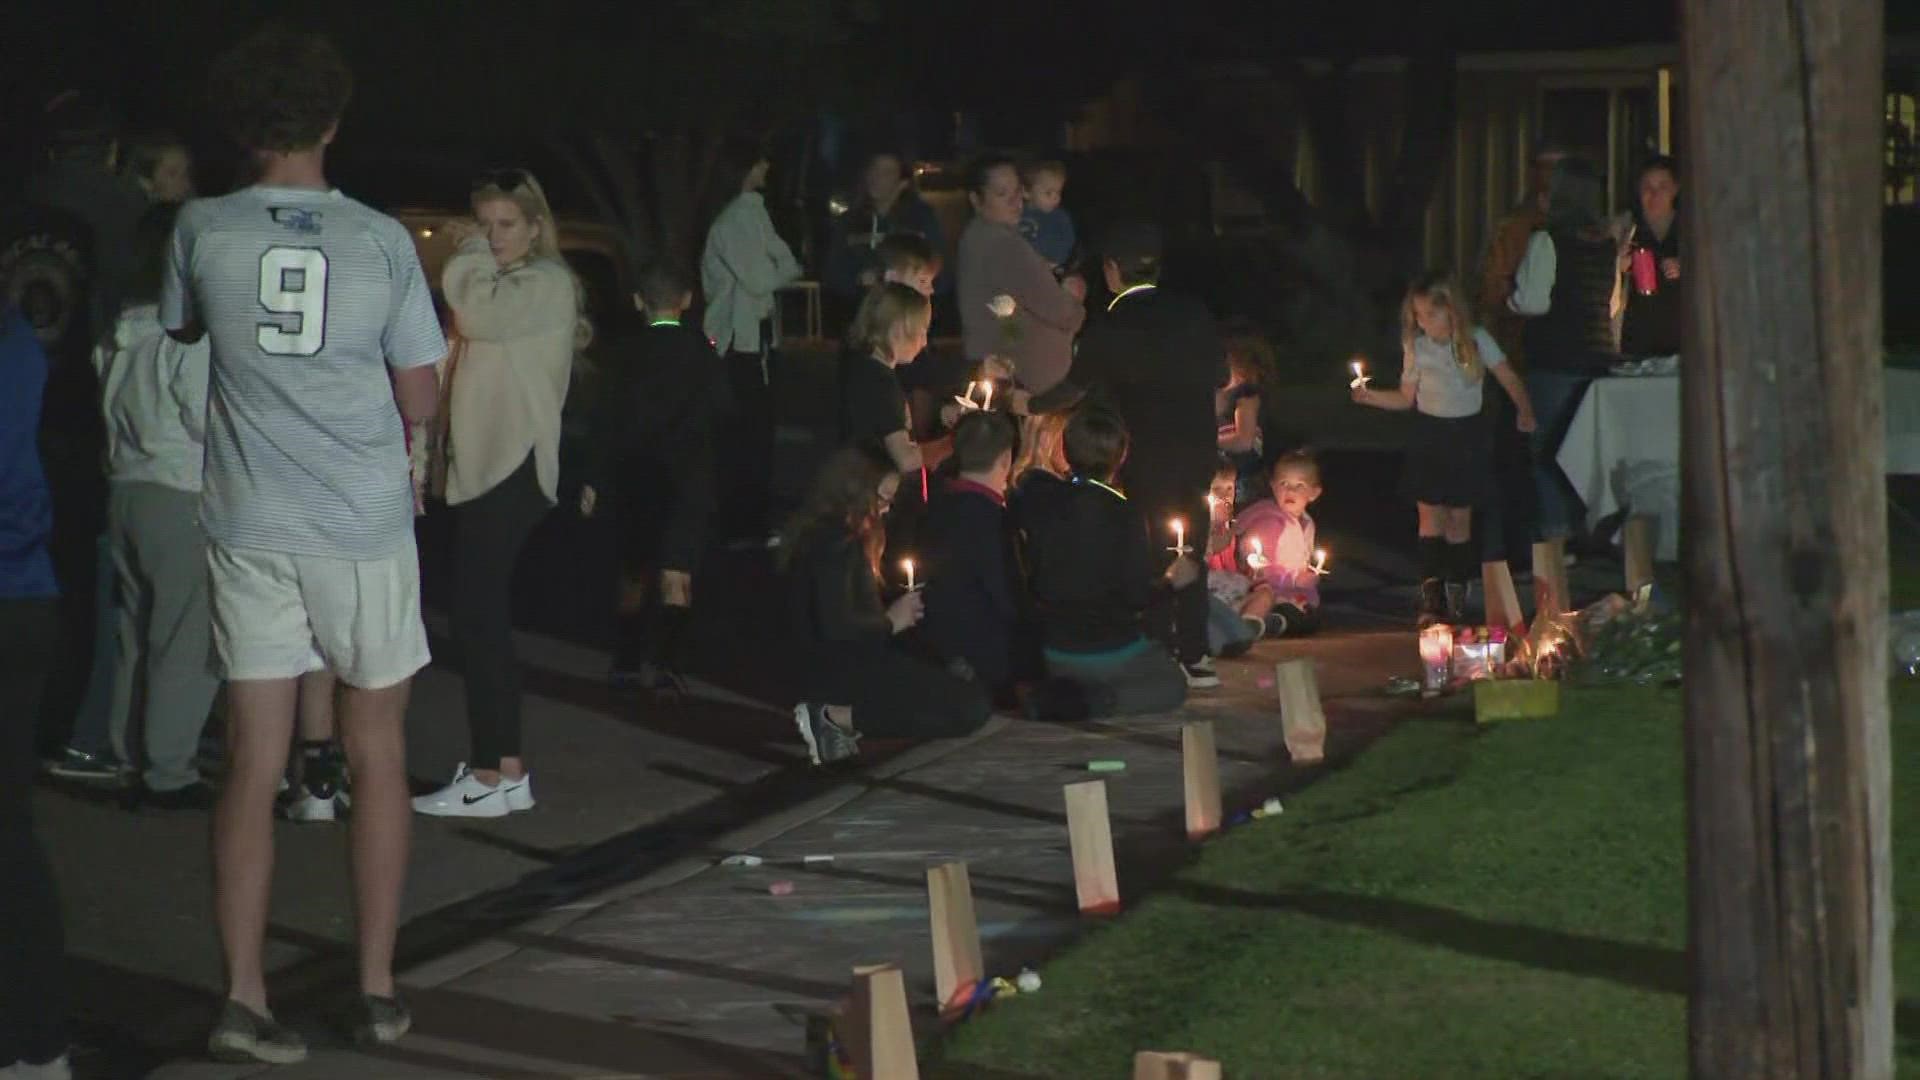 Community members gathered in Phoenix this evening to light candles and pay respects to the victims of yesterday's tragedy.